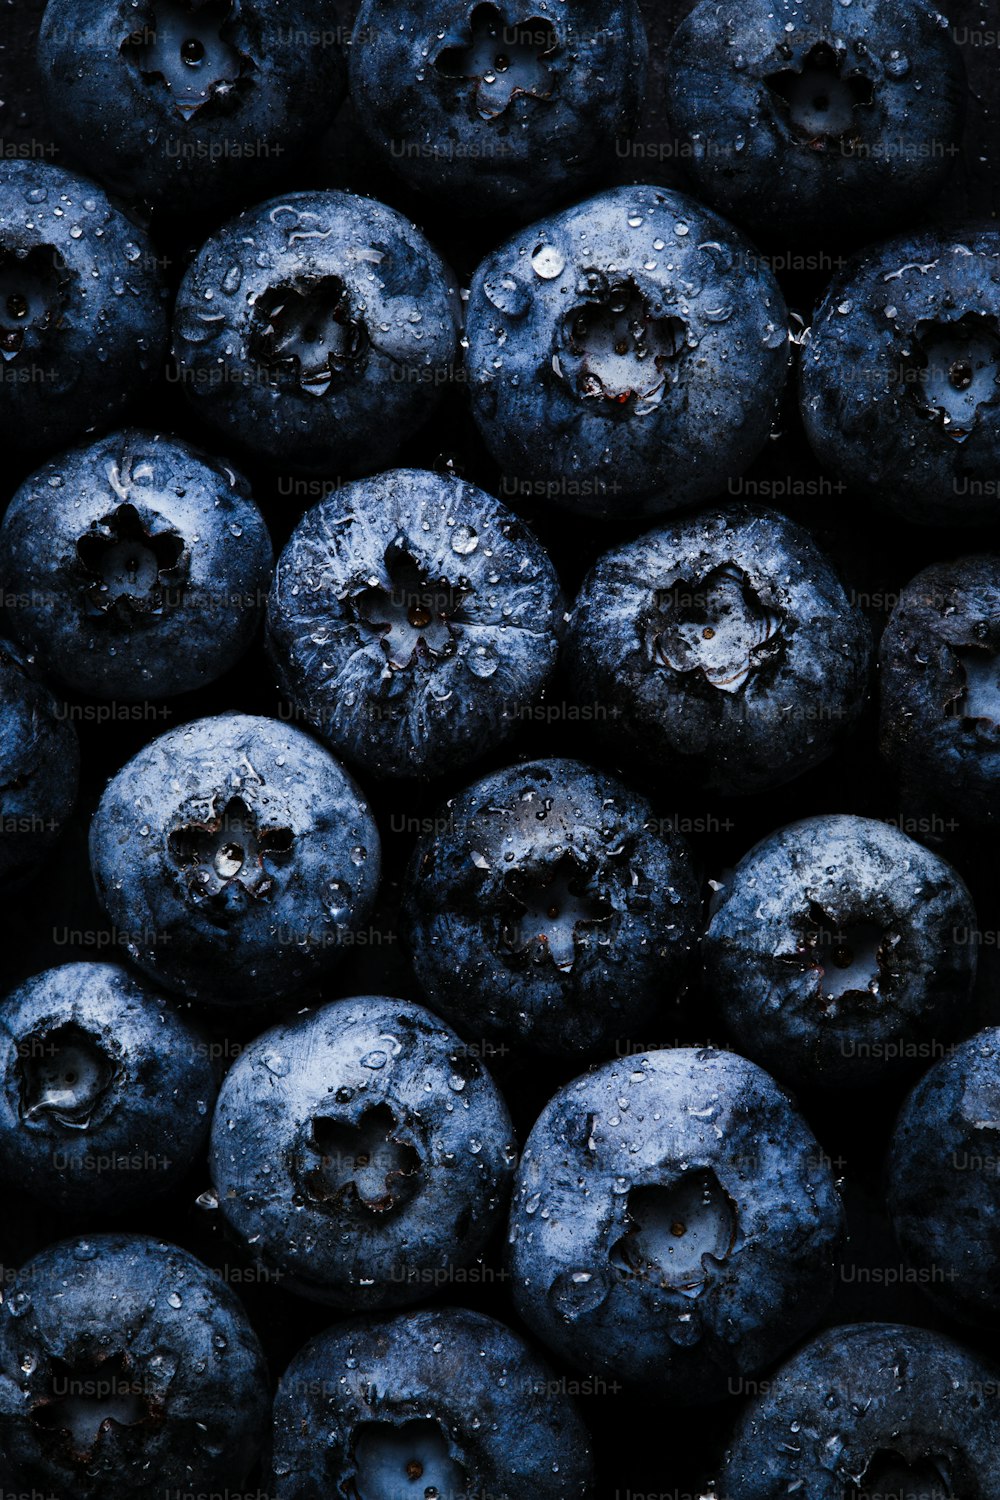 a close up of blueberries with water droplets on them